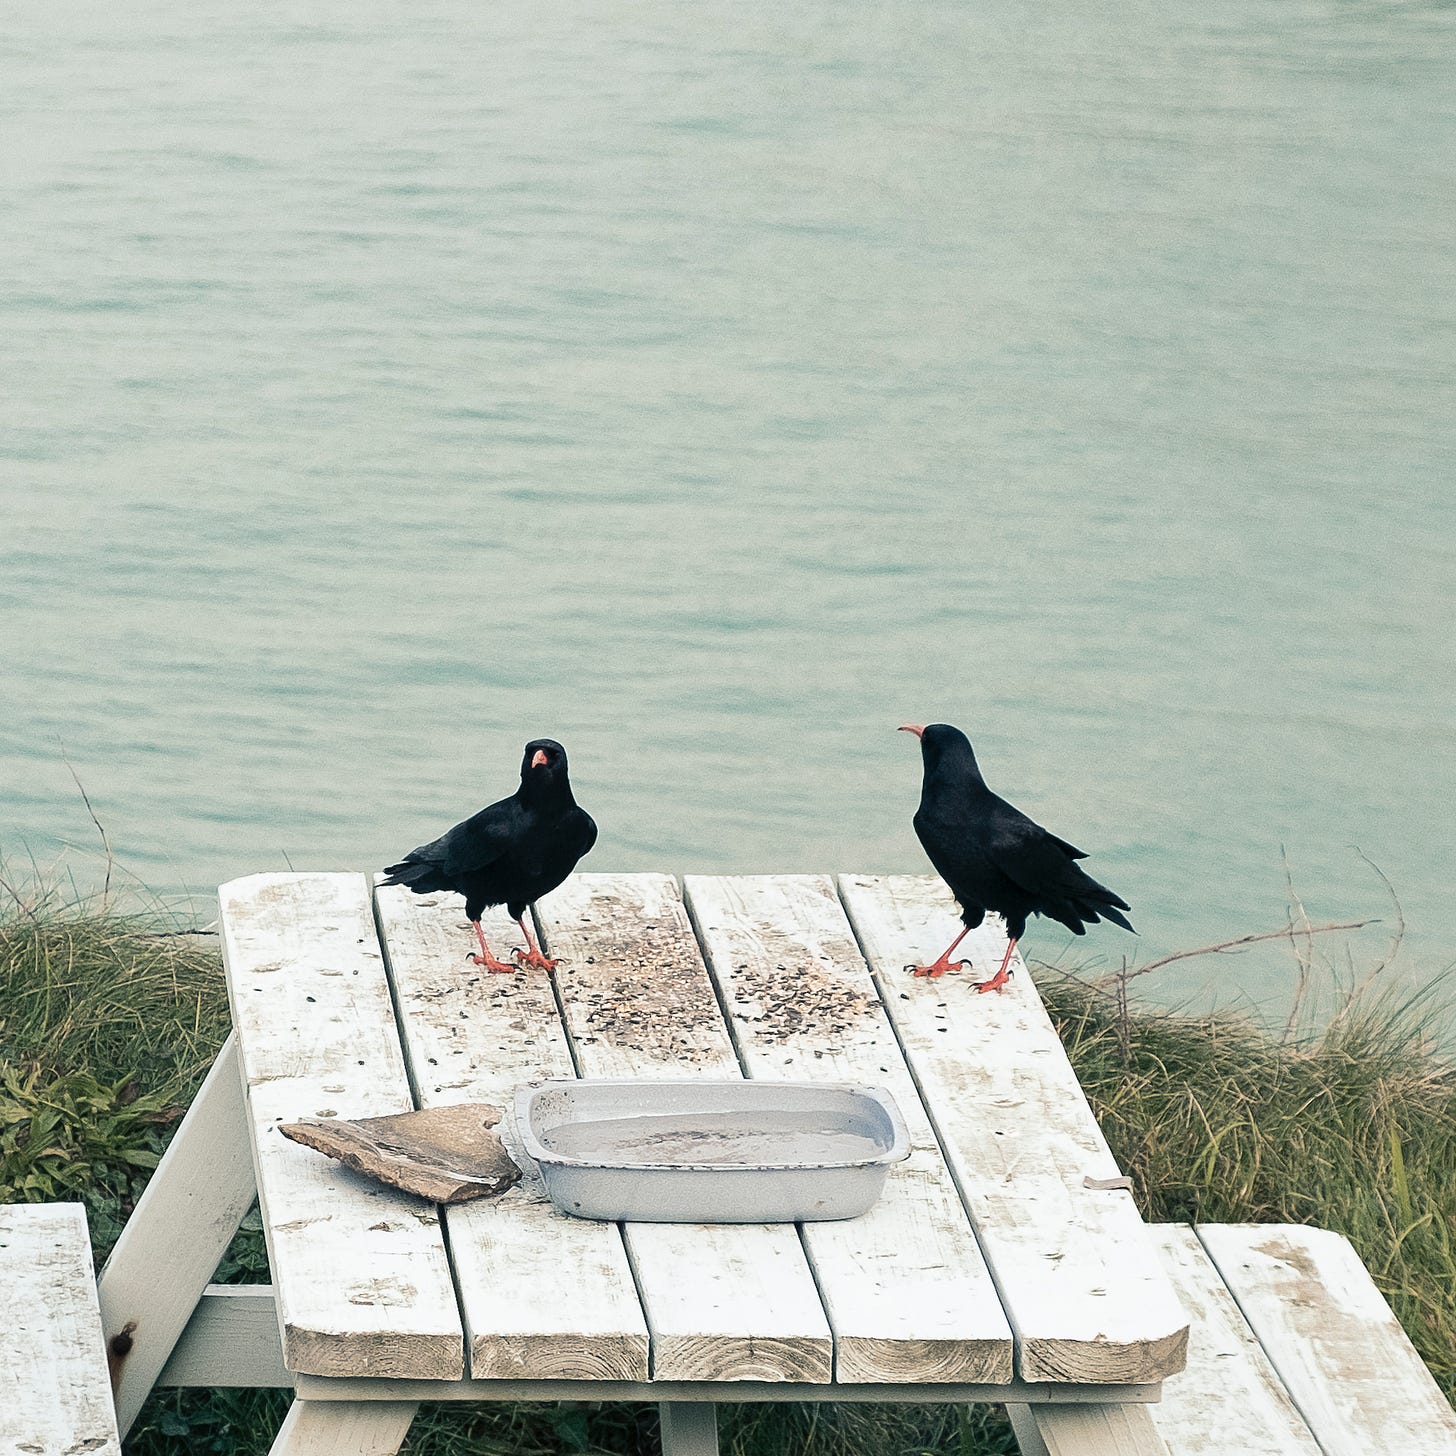 Two choughs (black birds with red bills and legs) on a picnic table with blue-green sea in the background